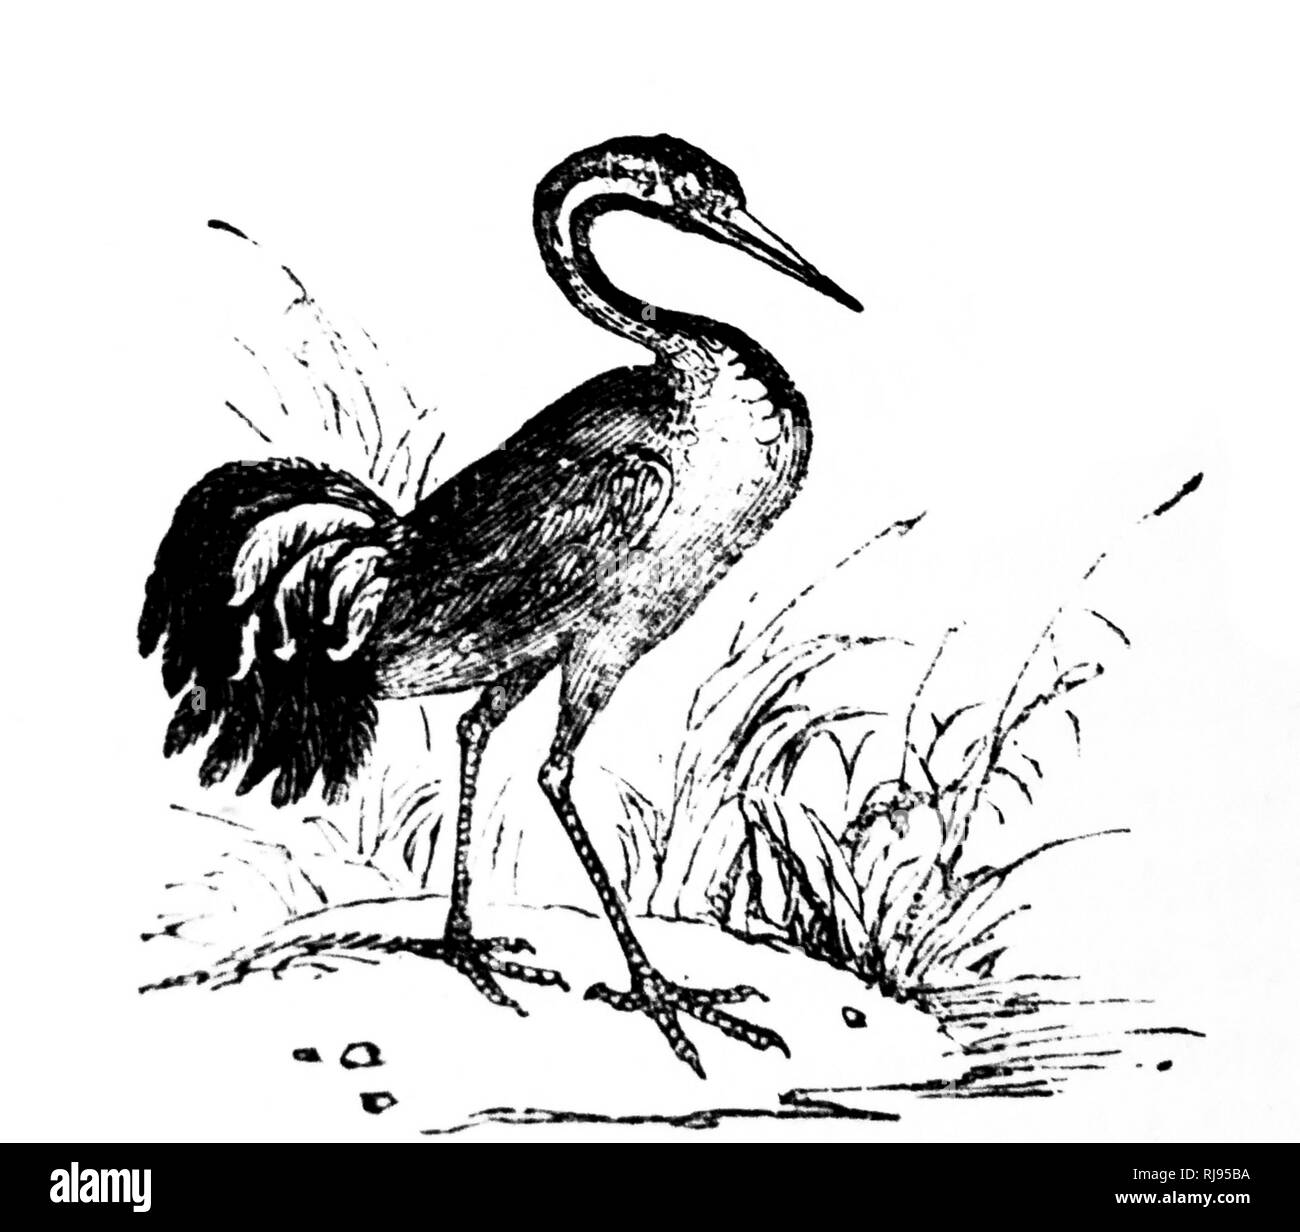 An engraving depicting a crane, a large, long-legged and long-necked bird in the group Gruiformes. Dated 19th Century Stock Photo